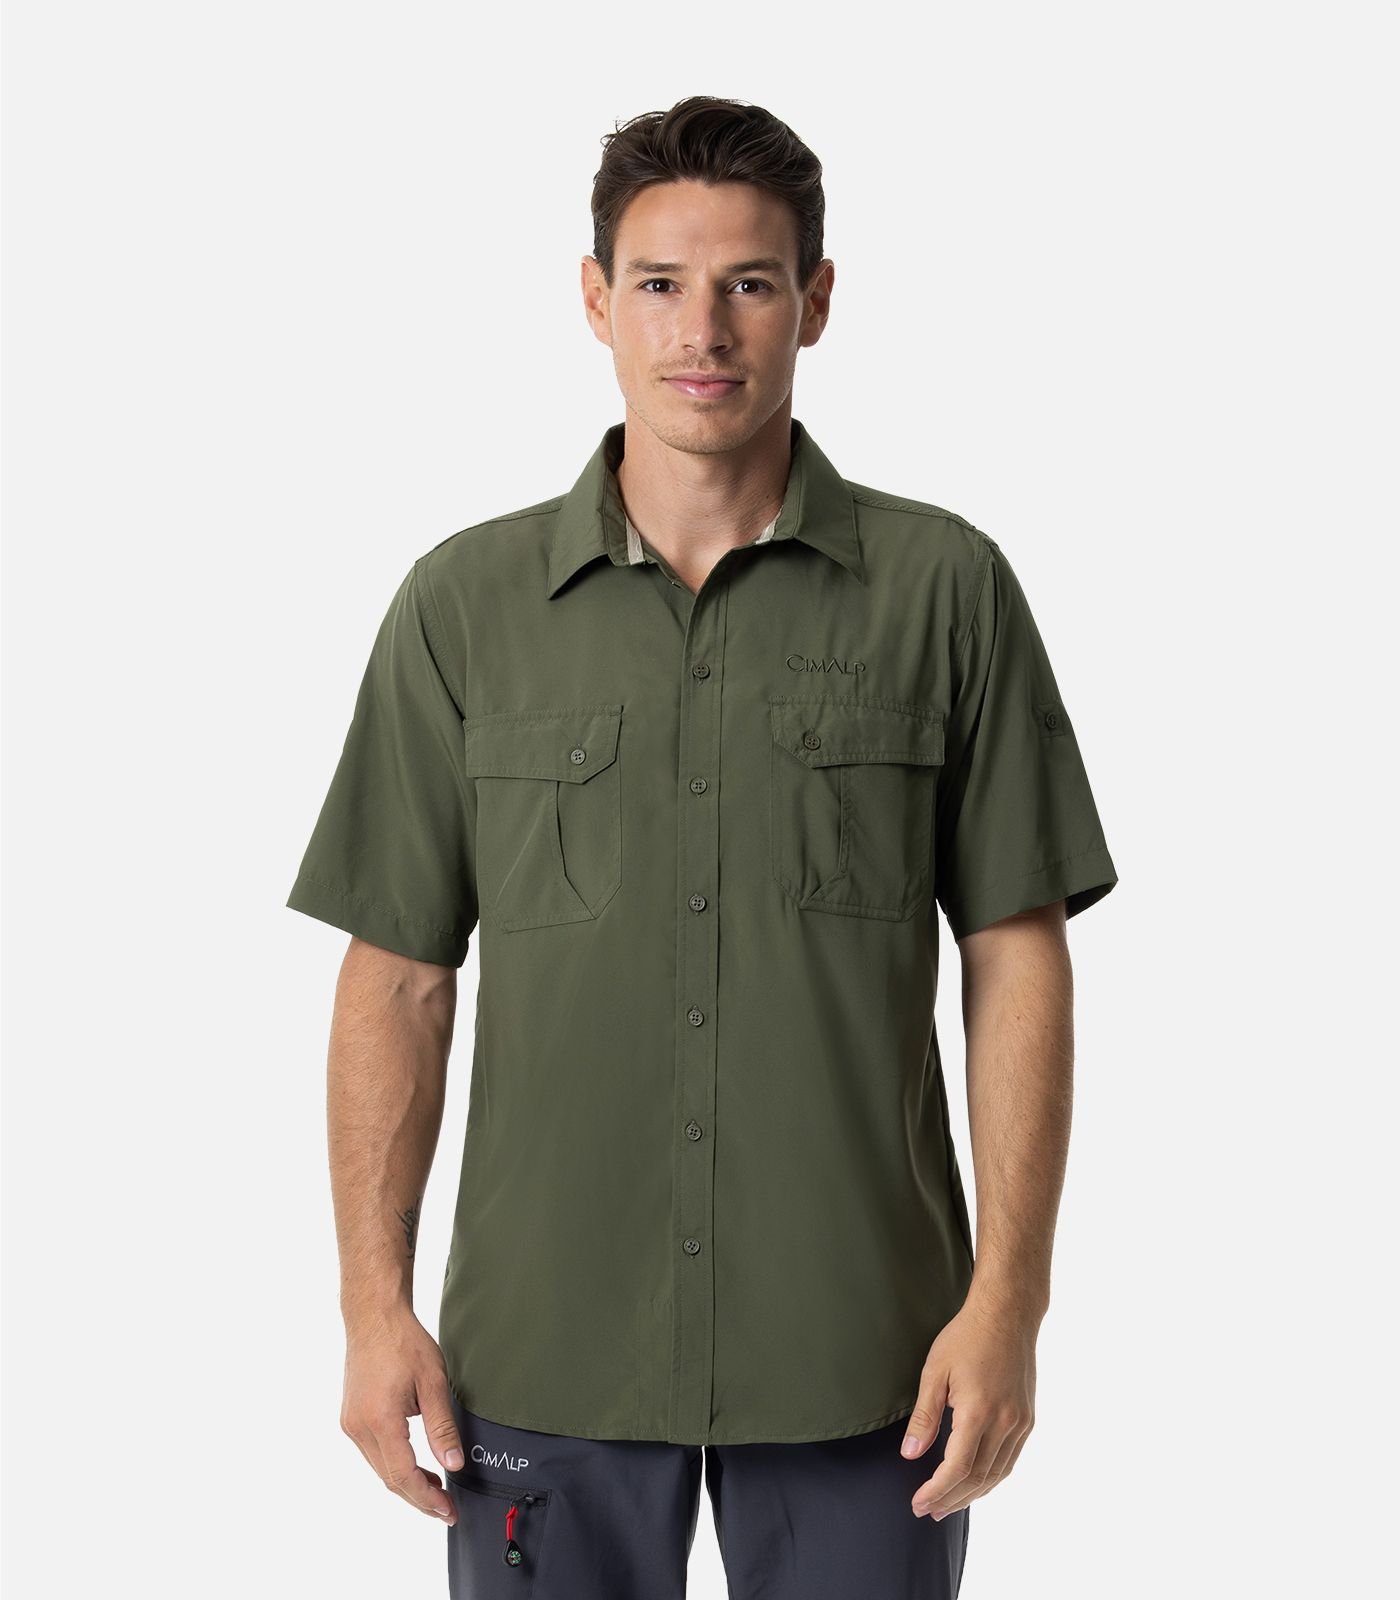 Hiking shirt with mosquito protection and UV protection